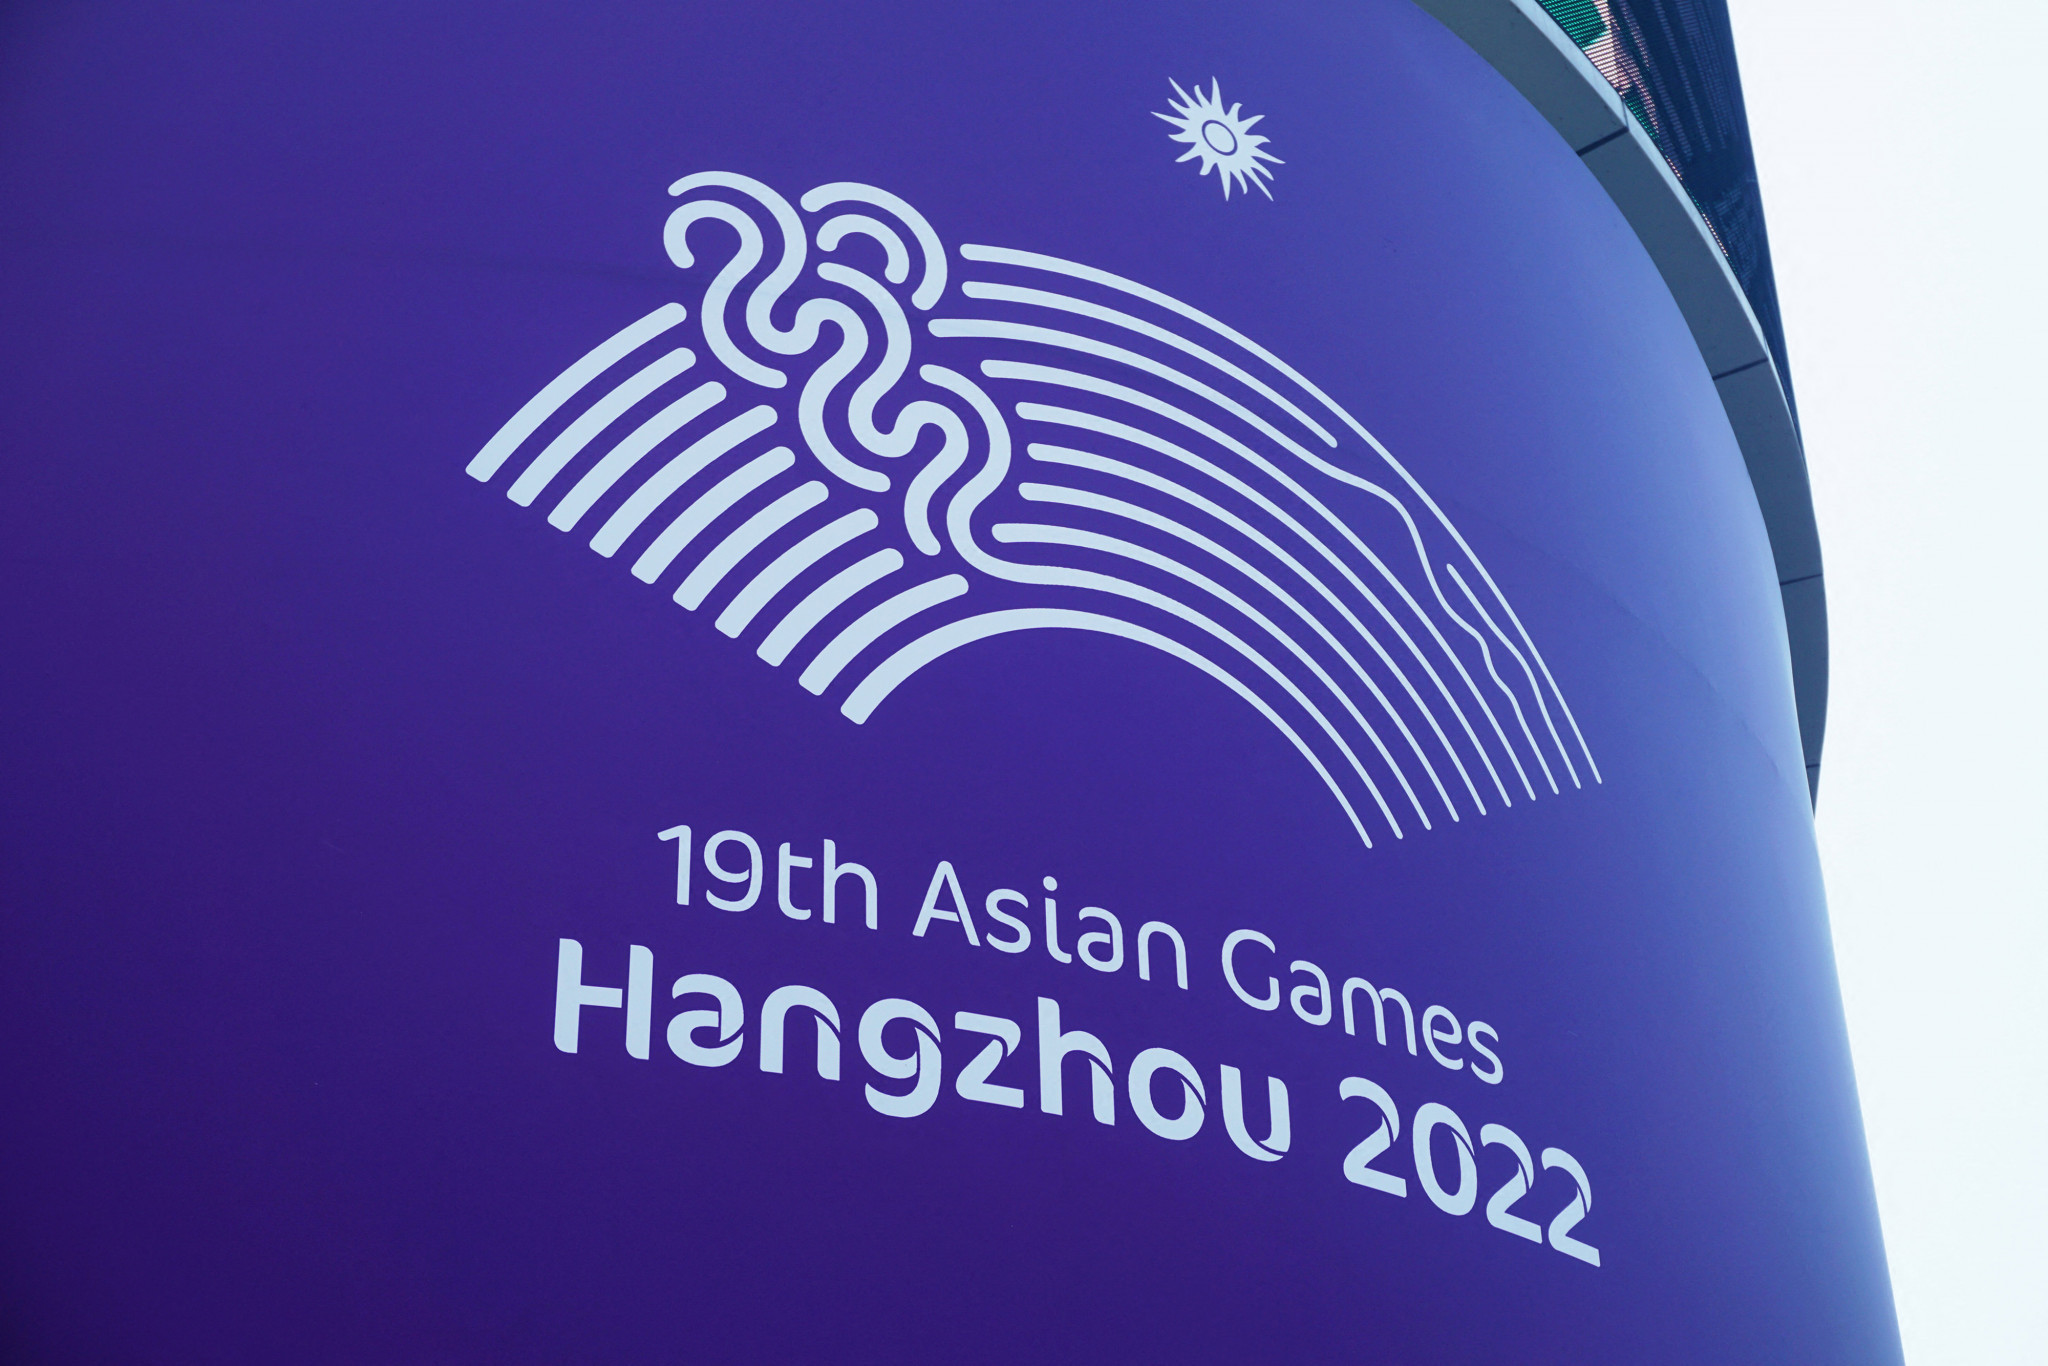 Hangzhou 2022 has new dates ©Getty Images